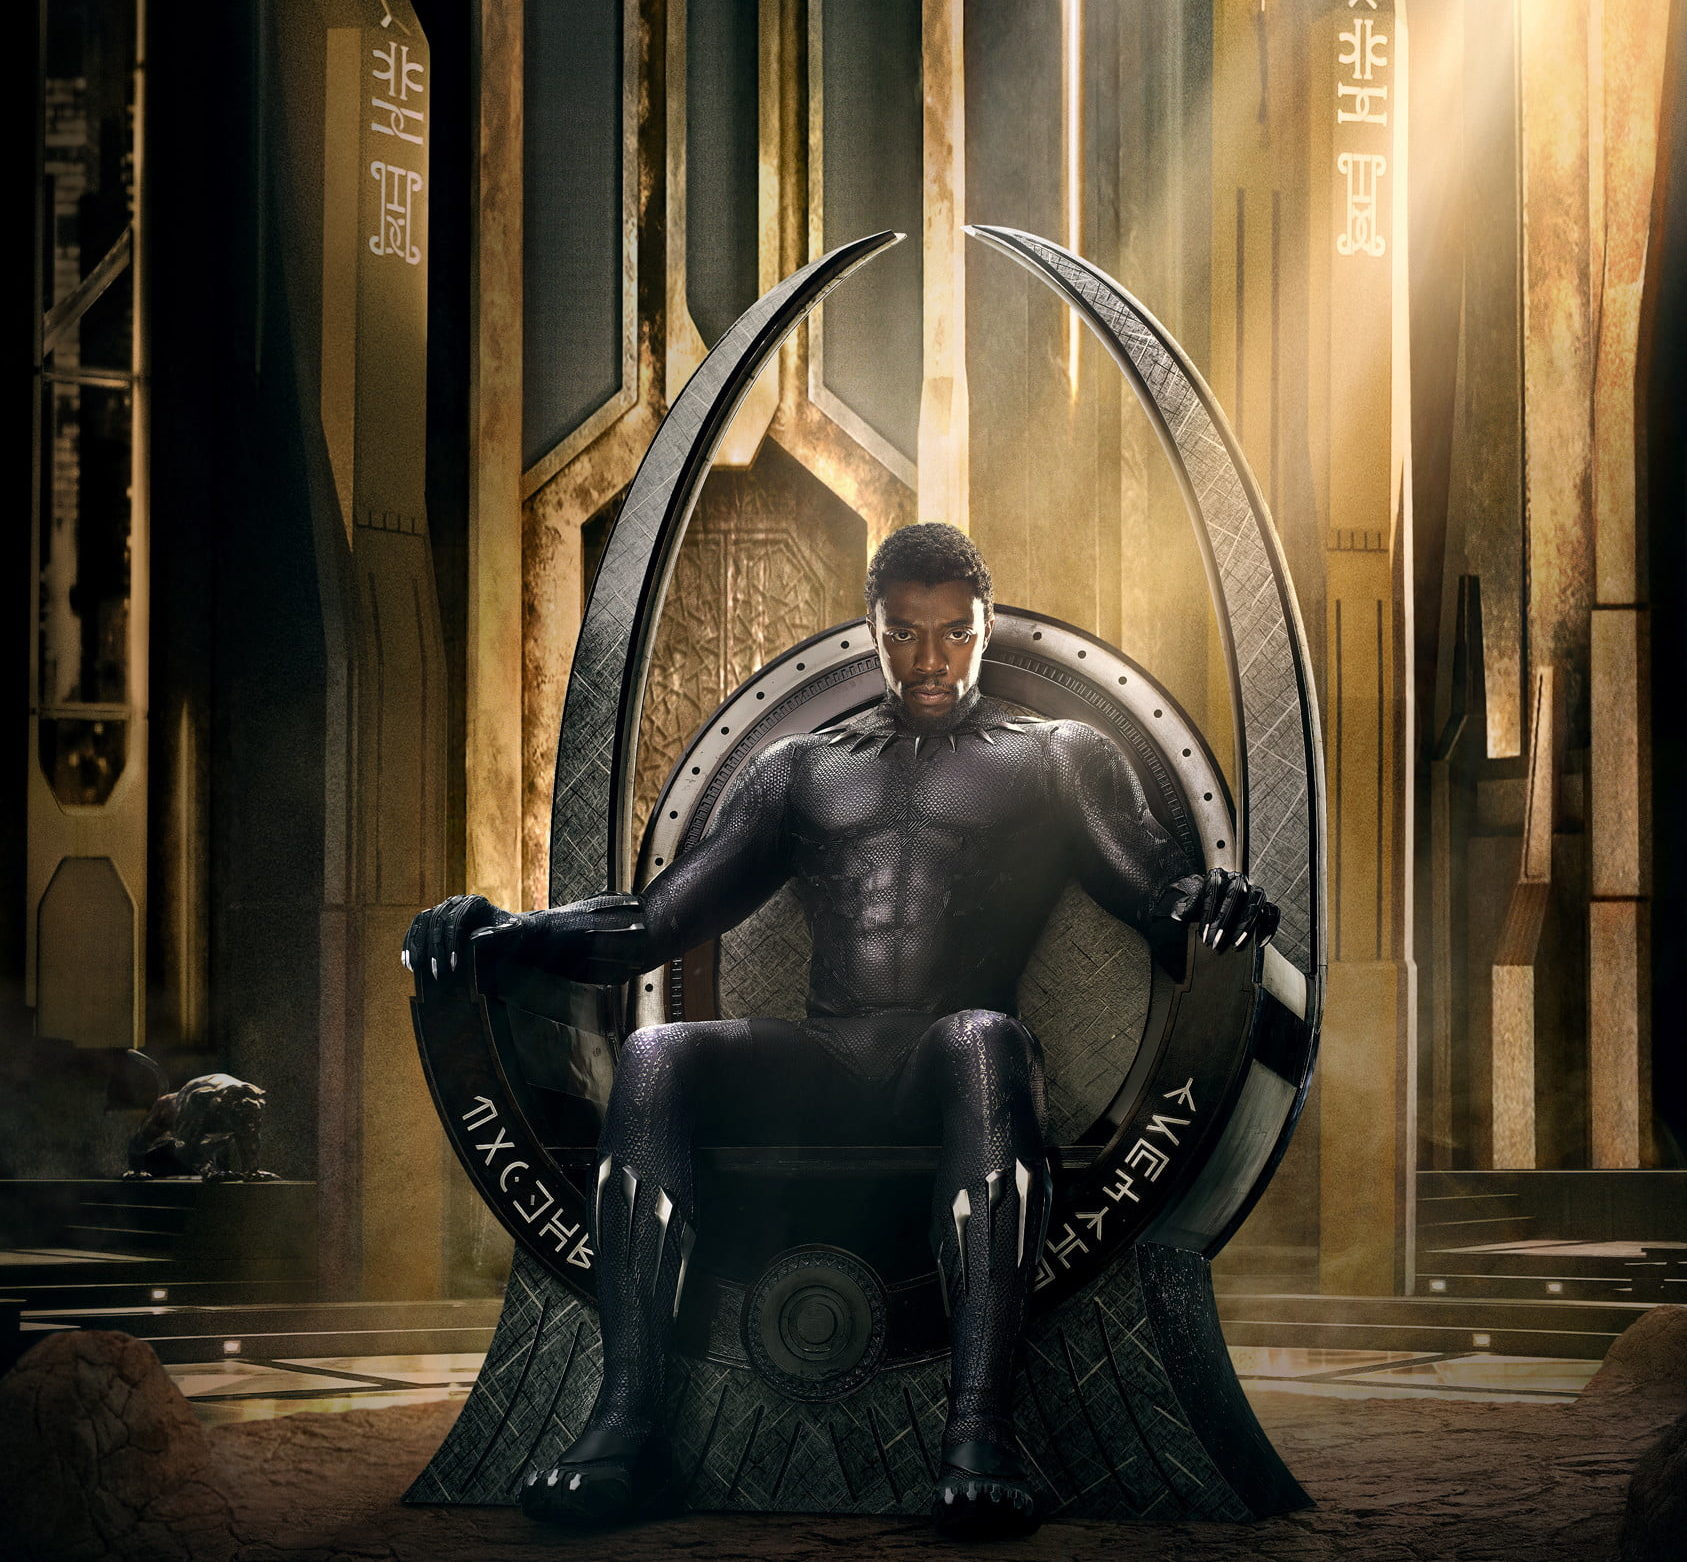 Black Panther’s Flawed and Outmoded Monarchy